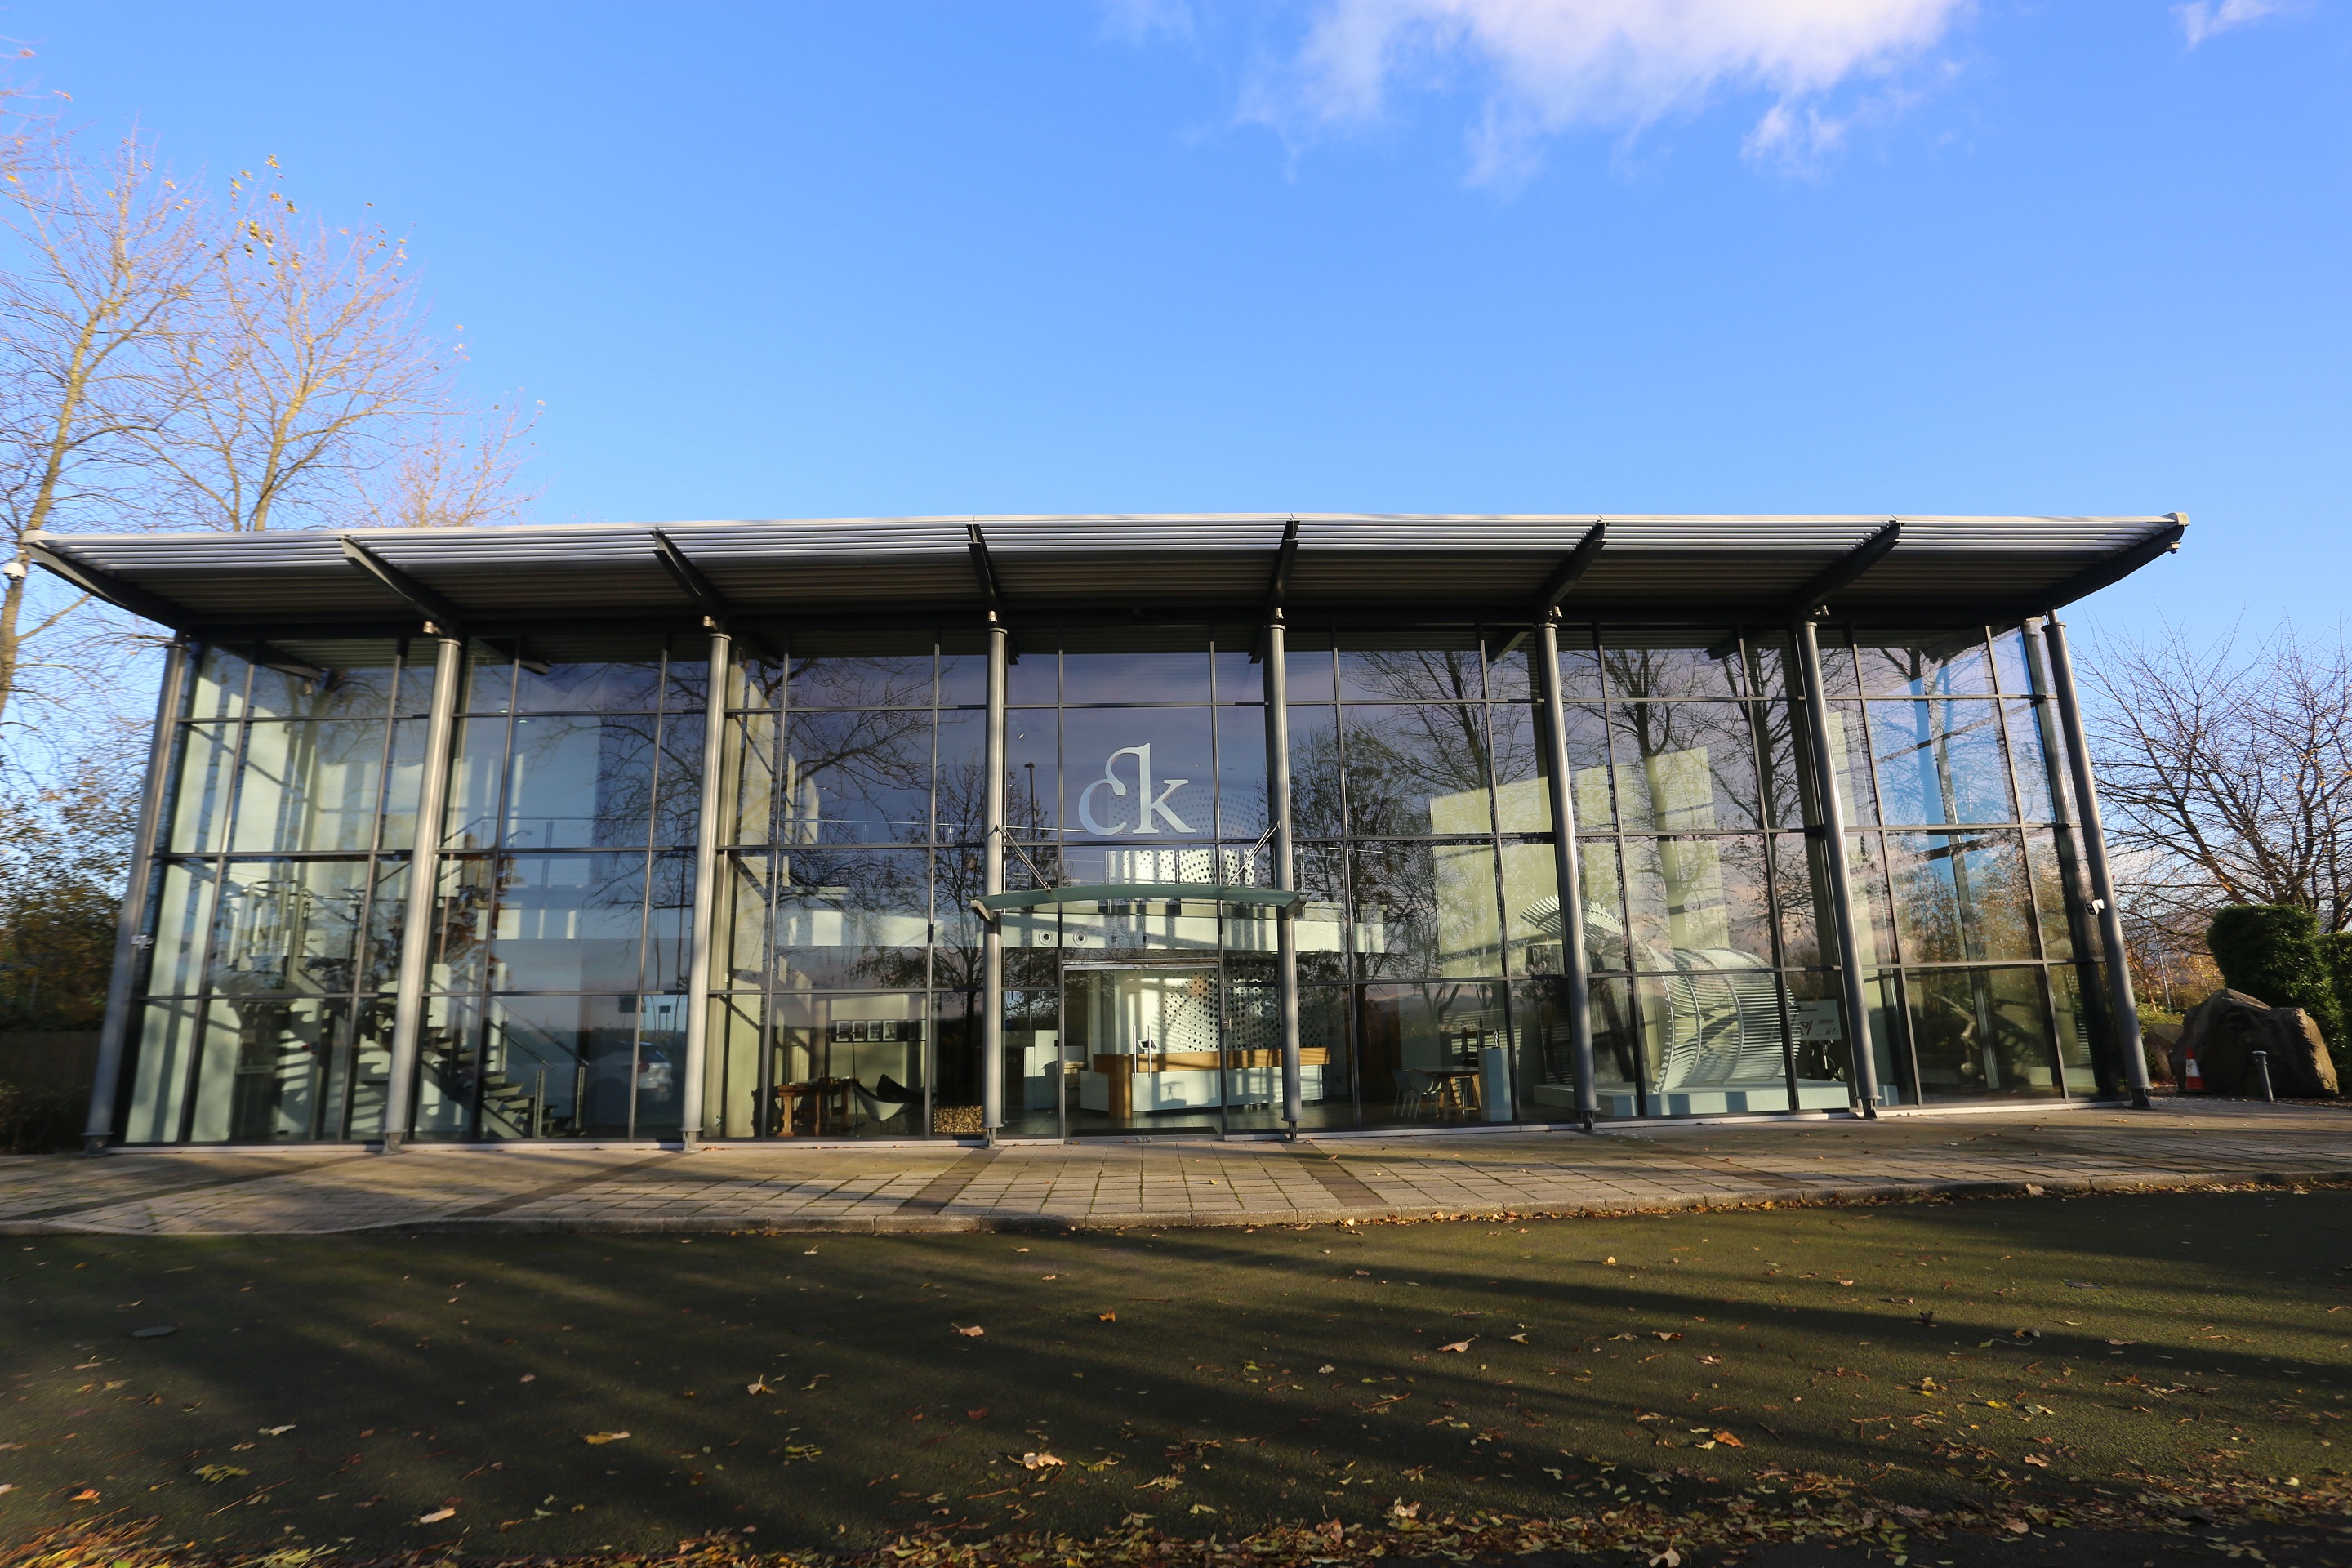 State of the art office complex comes onto the market in Cossington Leicester